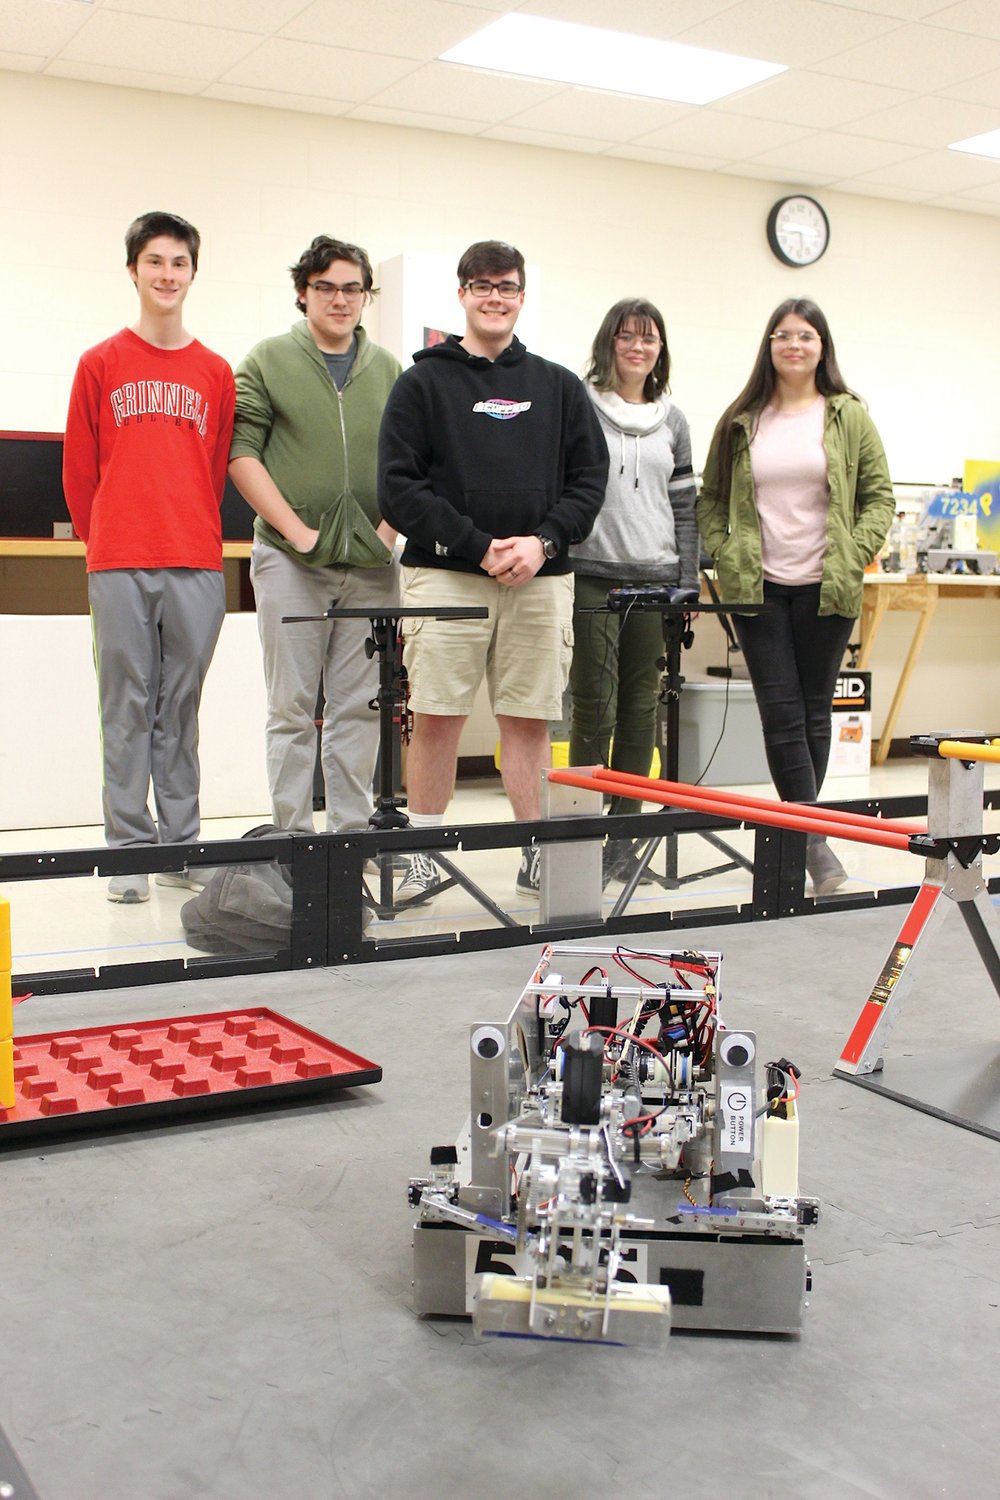 Members of the varsity-like TOBOR robotics team at Crawfordsville High School perform some maneuvers with their designs Tuesday. Members include Luka Mikek, from left, Tayden Morgan, Ian Conkright, Evie Redding and Gwyn Redding.